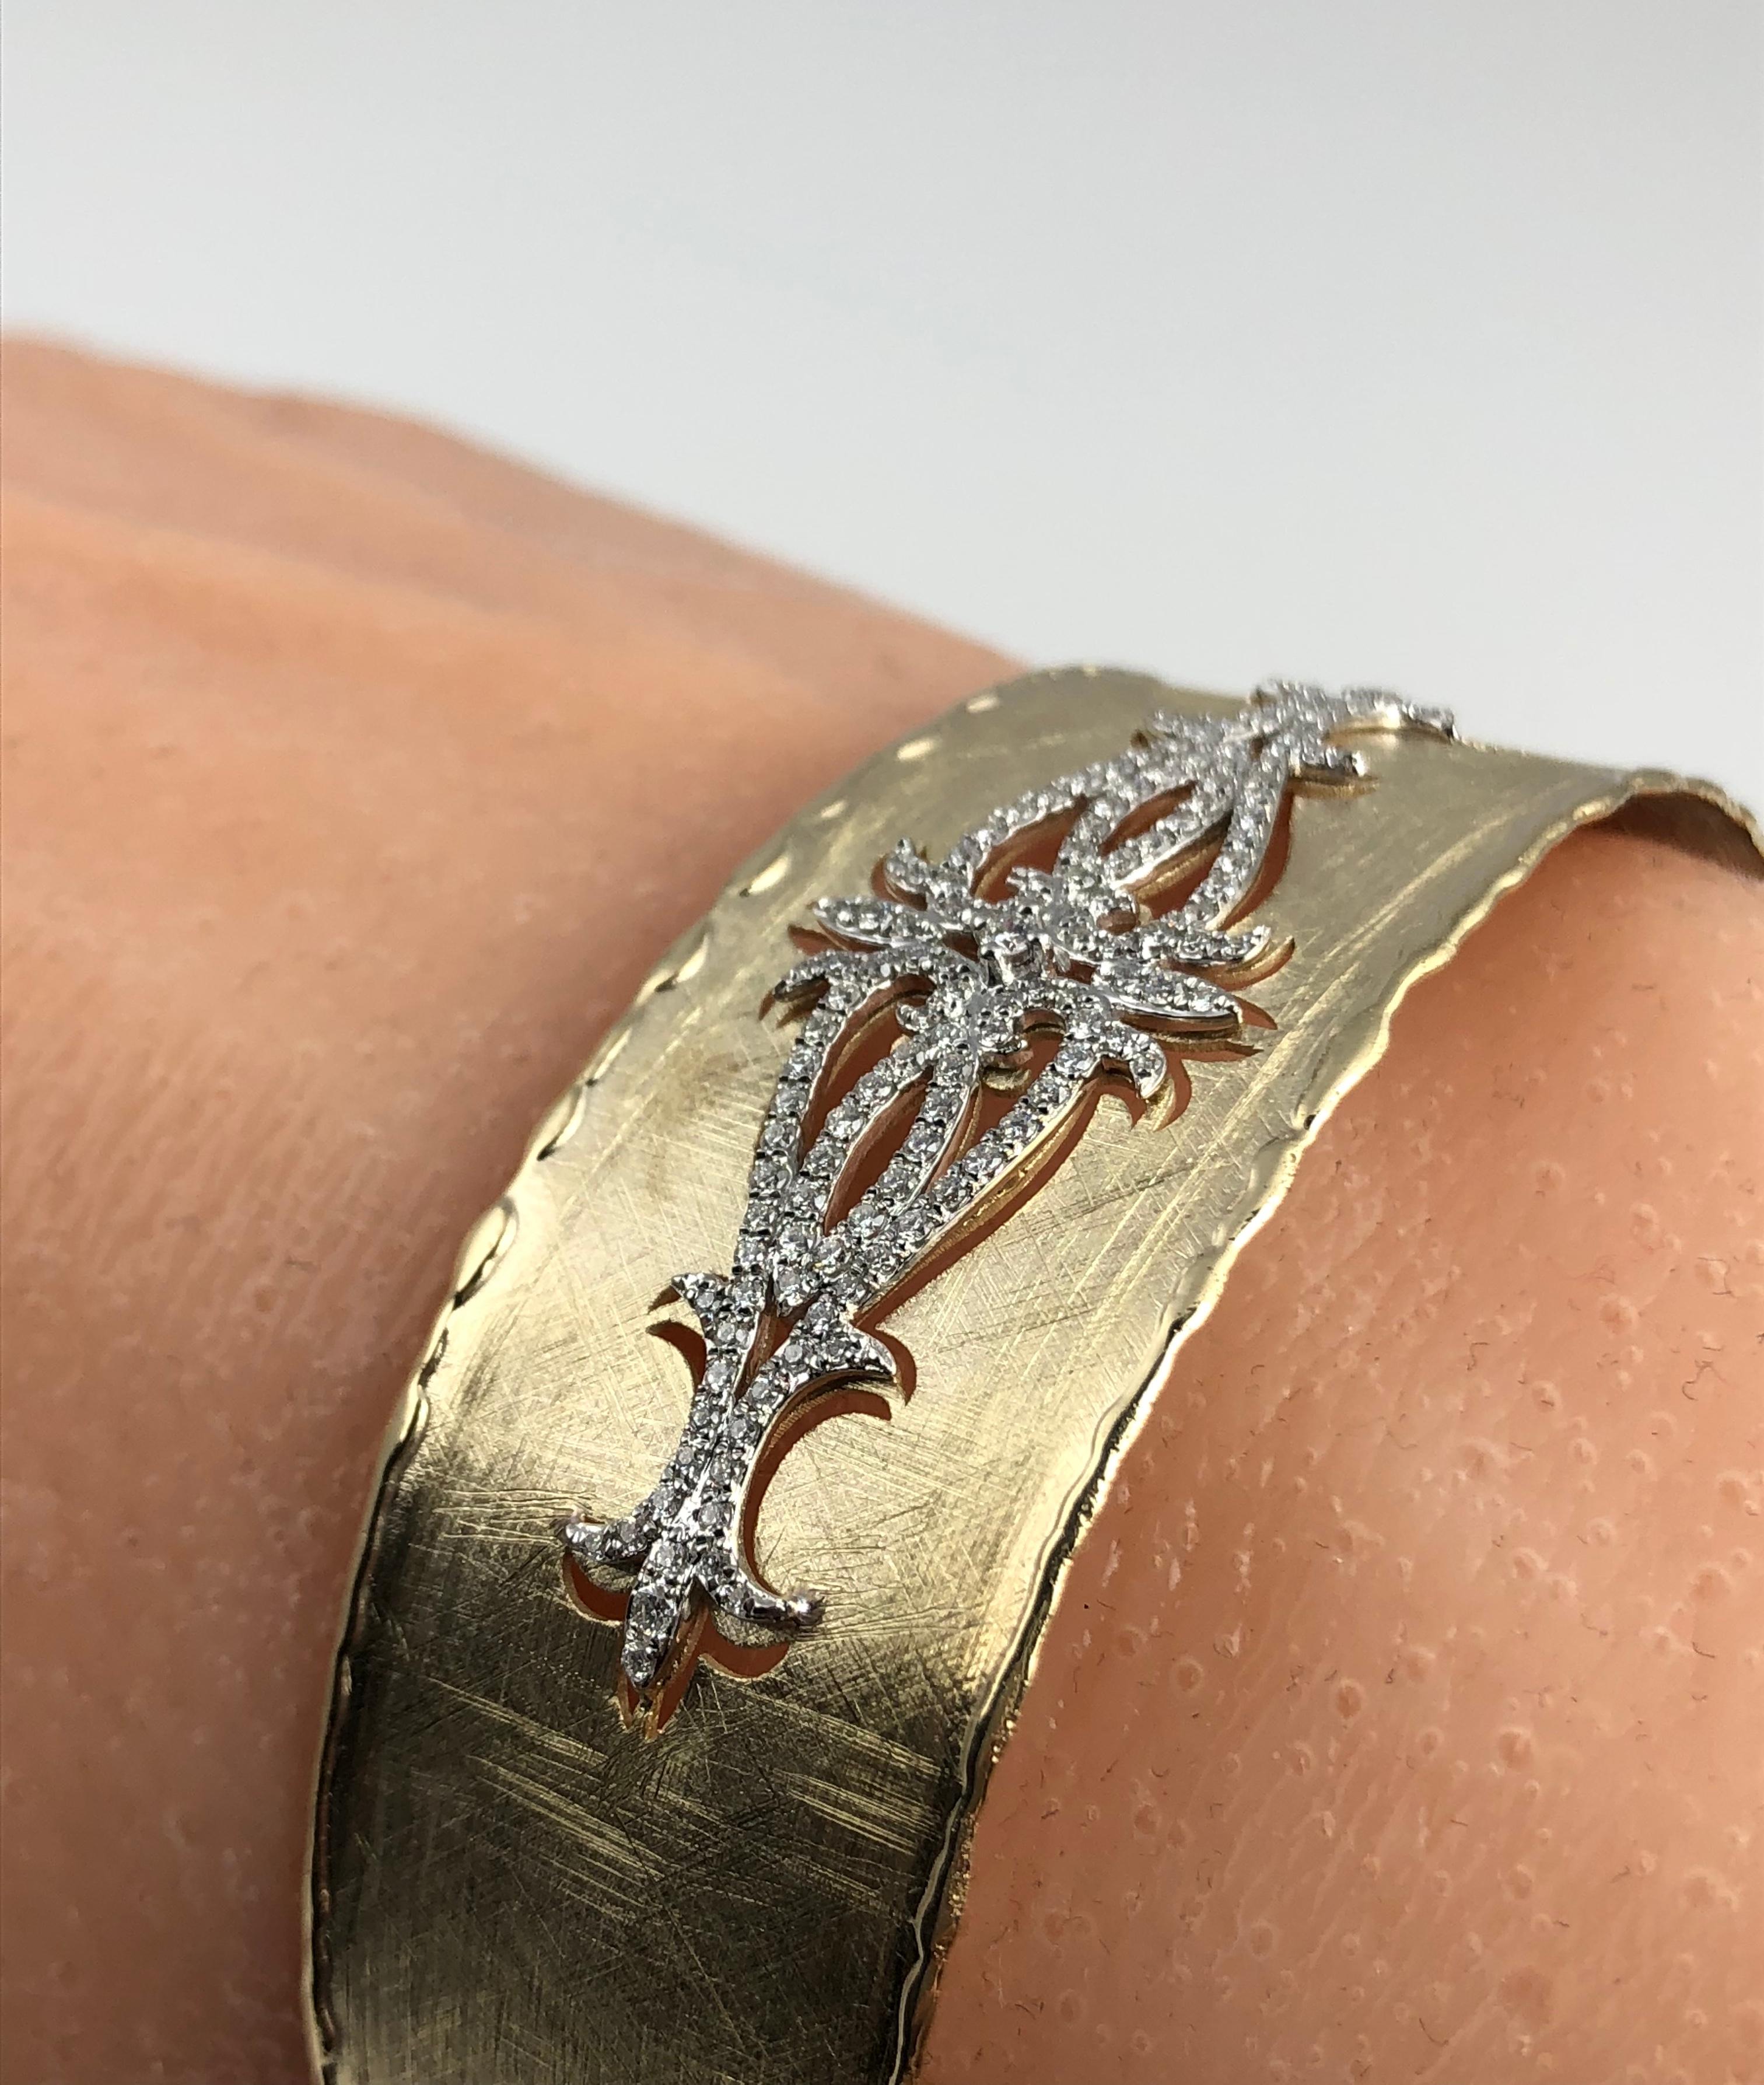 (DiamondTown) This rustic bangle has a brushed yellow gold design, accented by a diamond- accented cutout opposite the opening. The bangle is flexible enough to pass over the hand, without any hinge or buckle.

The bangle is set in 14k Yellow and